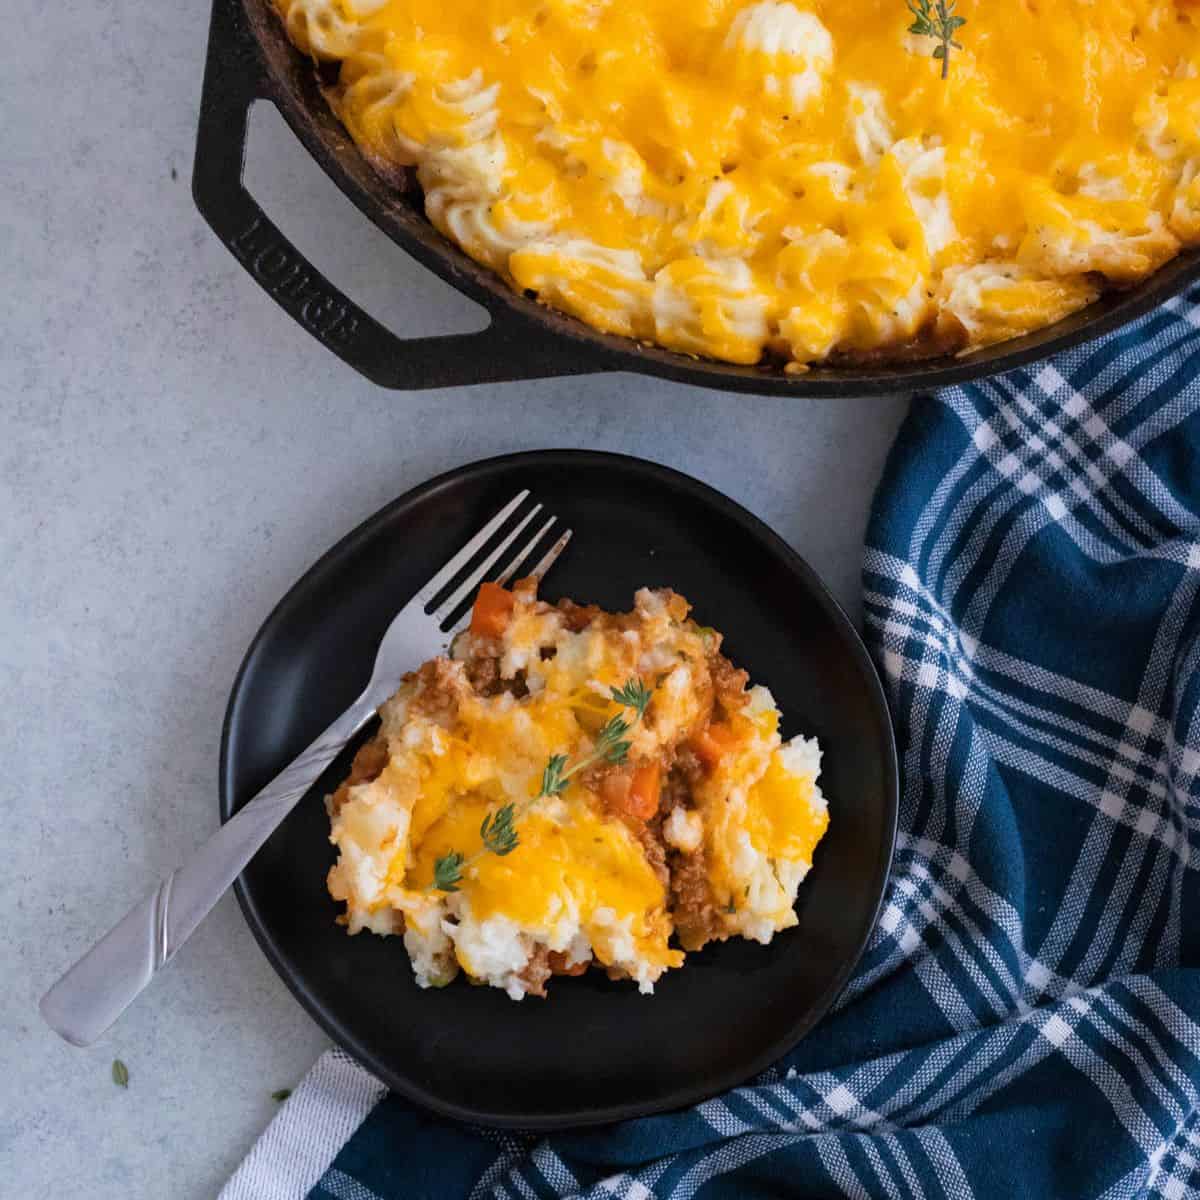 A plate of shepherds pie next to a cast iron skillet.